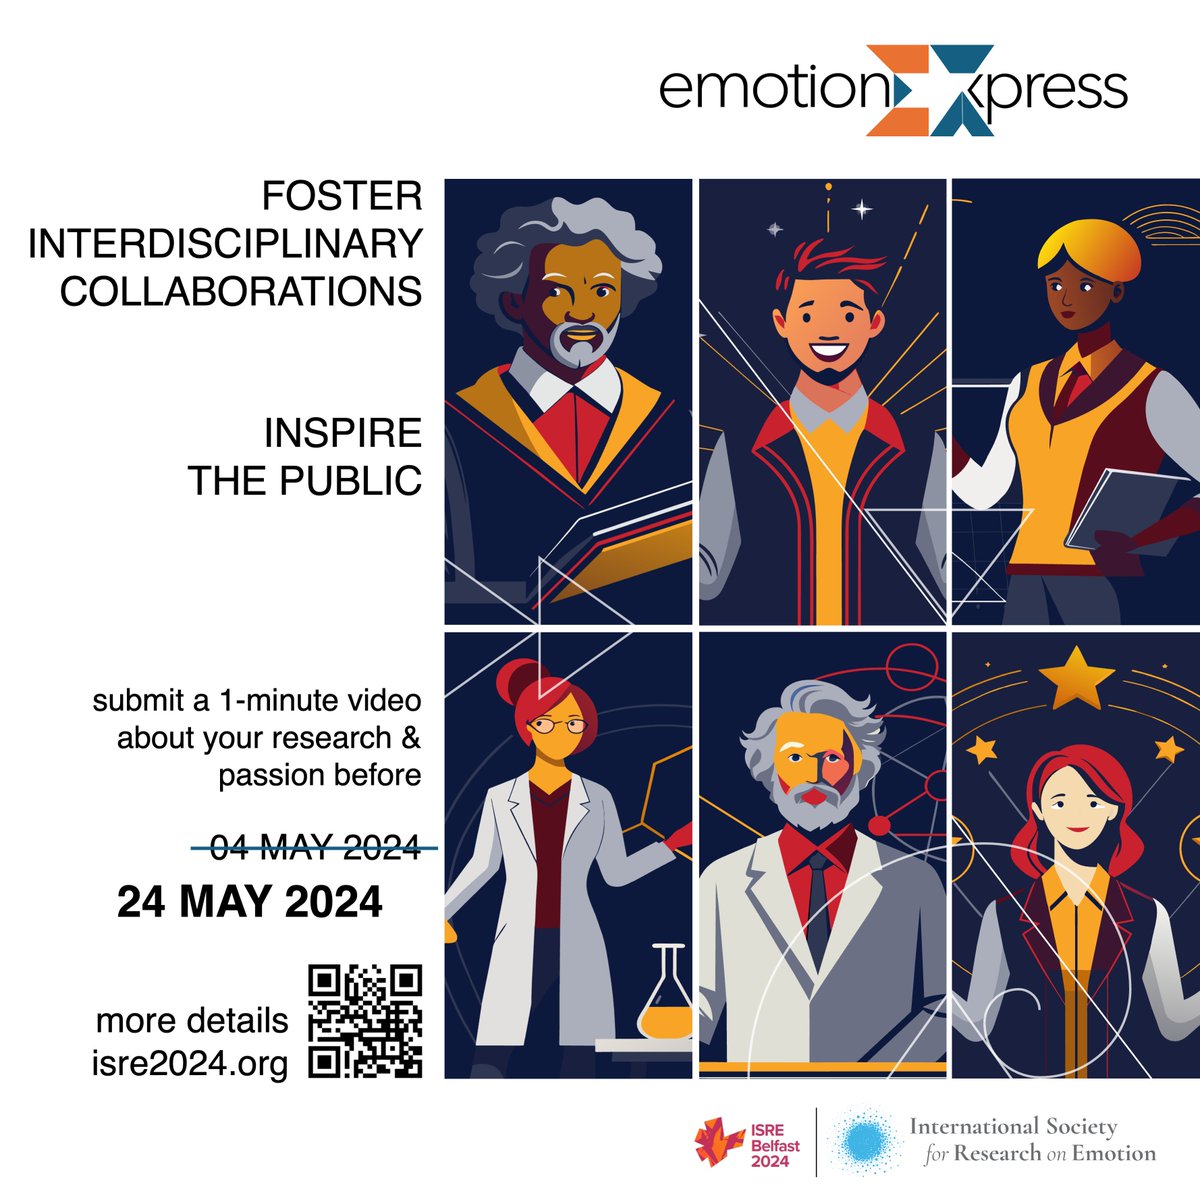 Need more time, you said? You've got it! May 24 is the new deadline to submit your 1-minute video for #EmotionExpress. Get your future collaborators & the public excited about your research, just as you are. Details about prizes, resources & submission: isre.org/news/news.asp?…